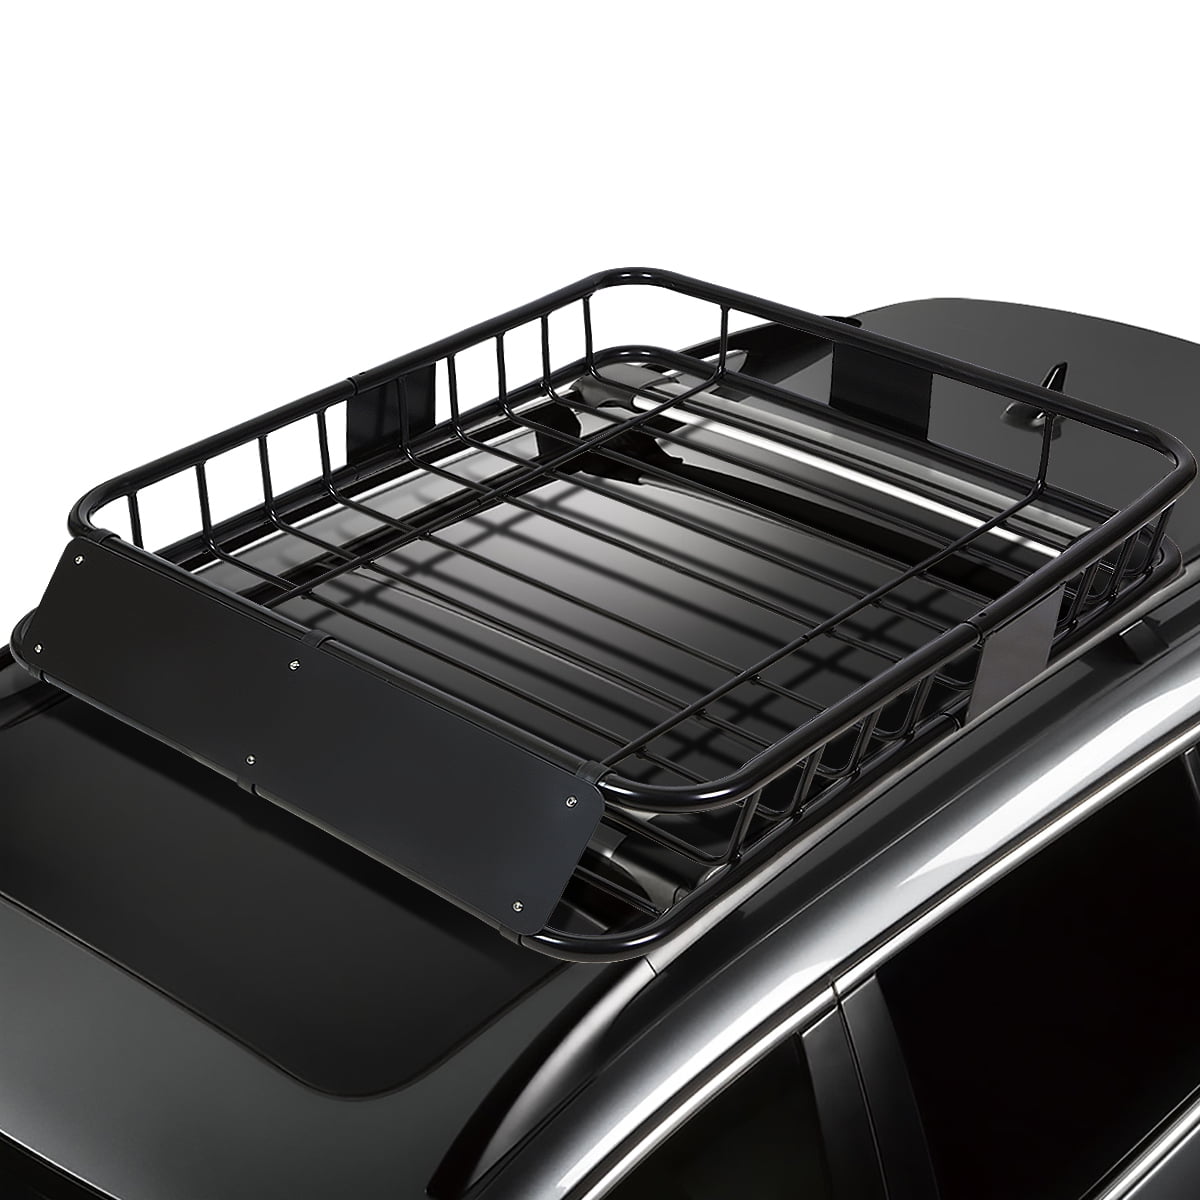 Mophorn Roof Basket Universal Aluminum Roof Rack Basket 63x40 Inch Roof Mounted Cargo Rack for Car Top Luggage Traveling SUV Holder 